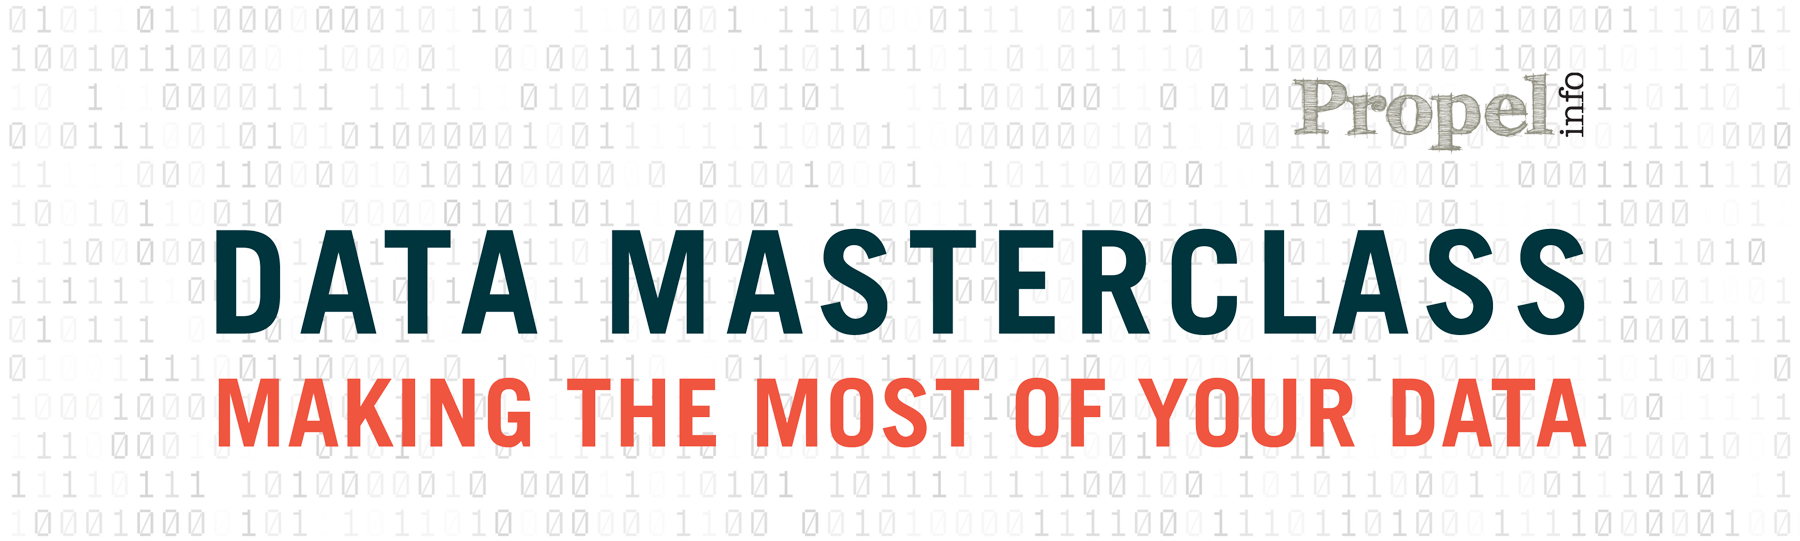 Data Masterclass: Making the most of your data